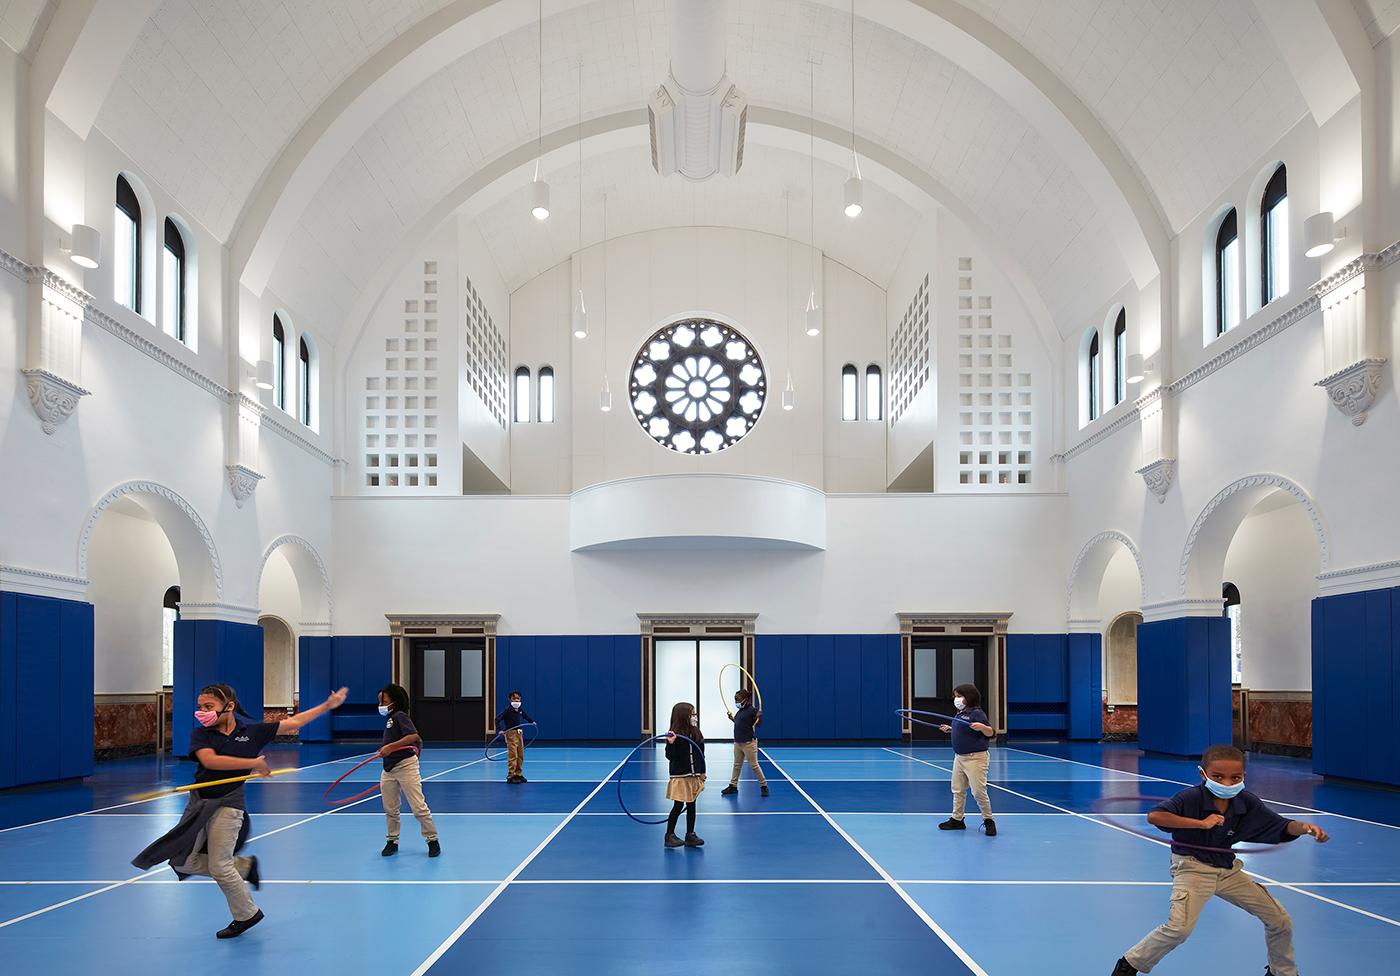 An expansion of Great Lakes Academy into an unused Catholic church